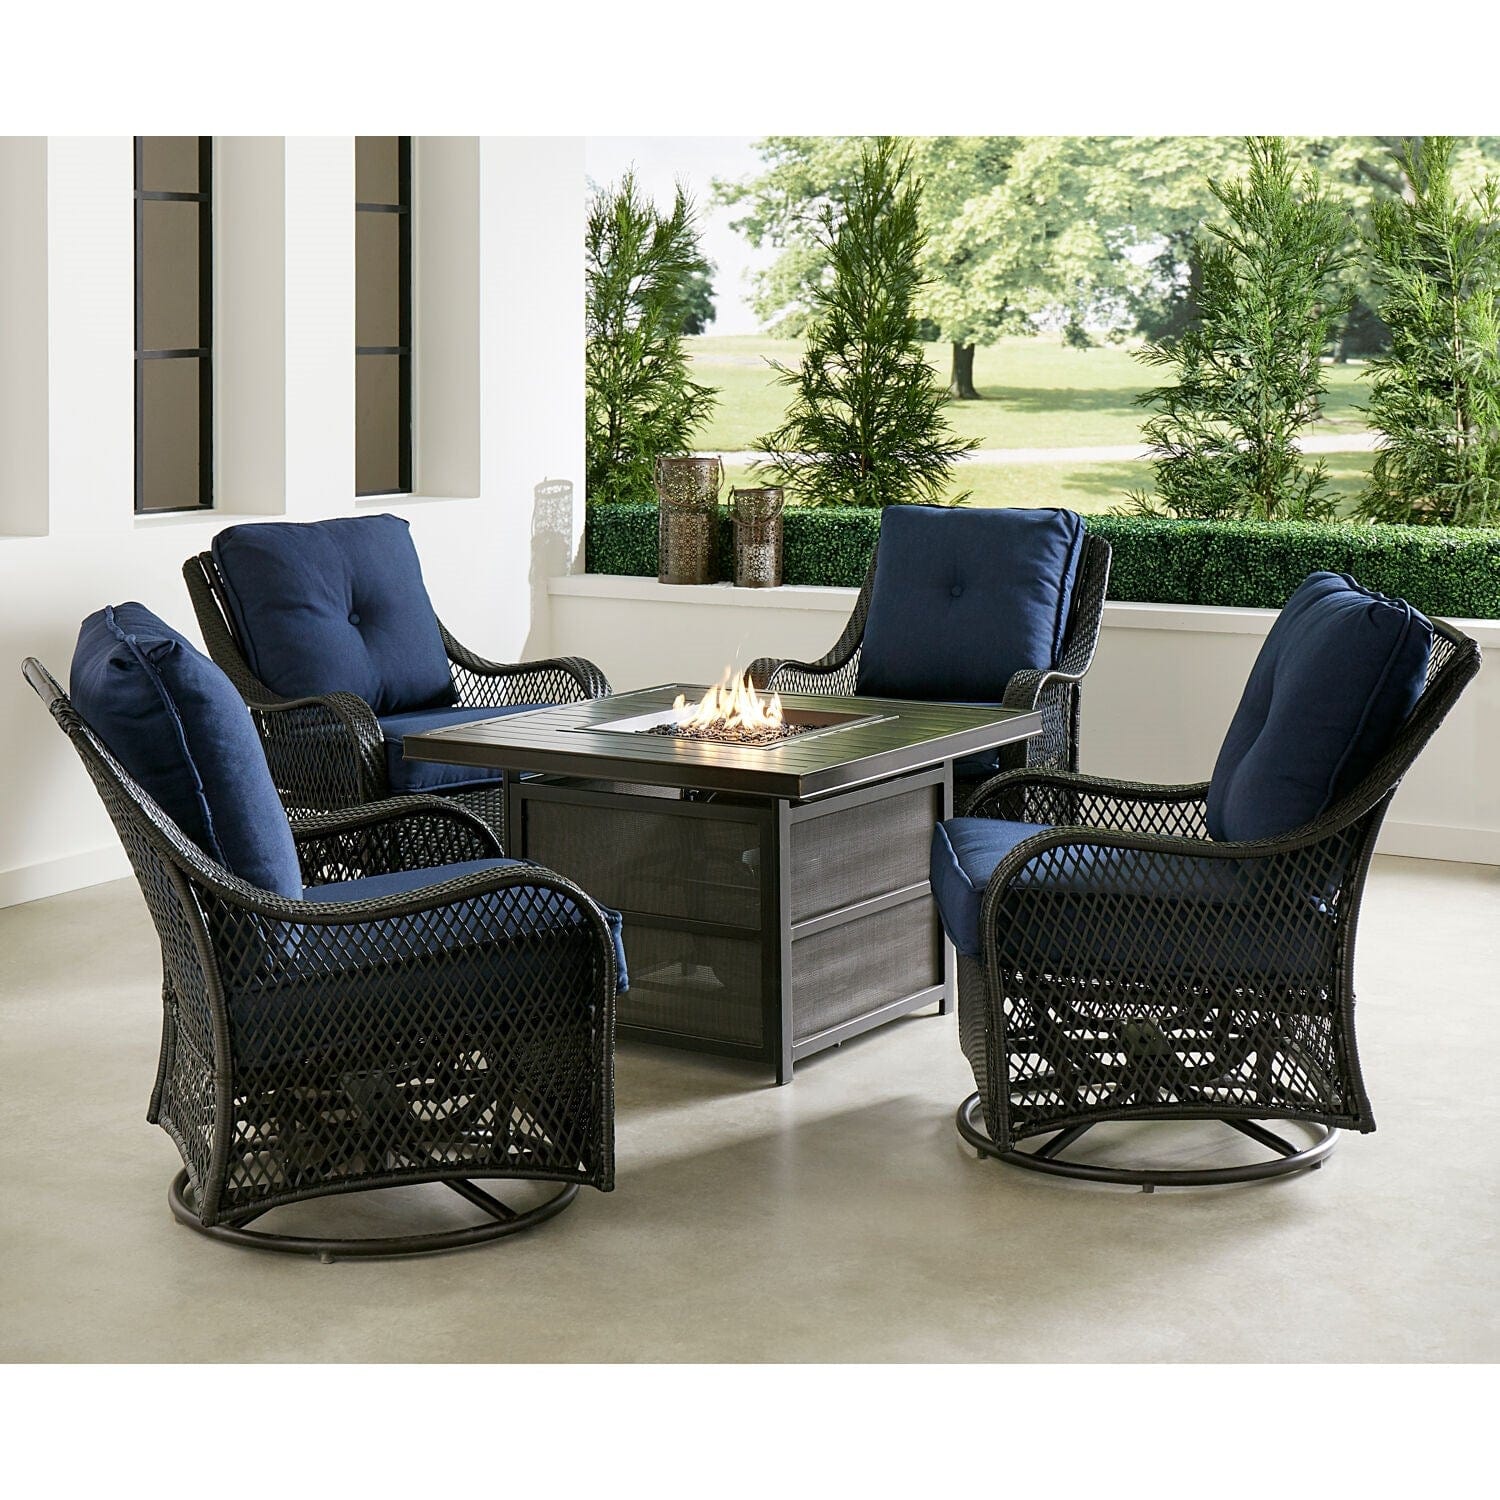 Hanover Fire Pit Chat Set Hanover Orleans 5-Piece Deep Seating Set with 4 Cushioned Swivel Gliders in Navy and 38-in. 30,000 BTU Slat-Top Gas Fire Pit Table